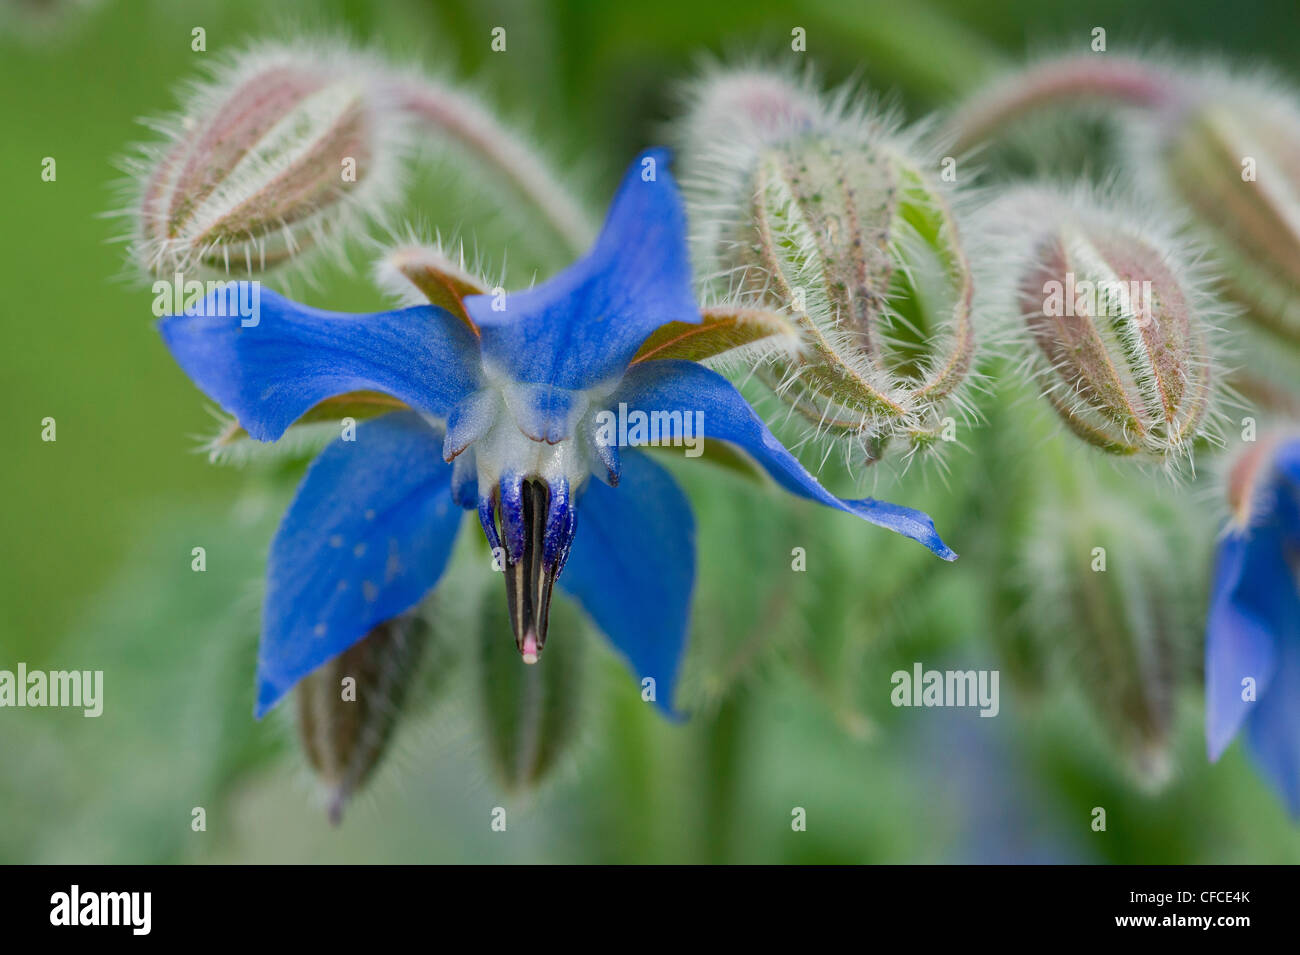 Macro of the bright blue flowers of the Borage plant. Stock Photo